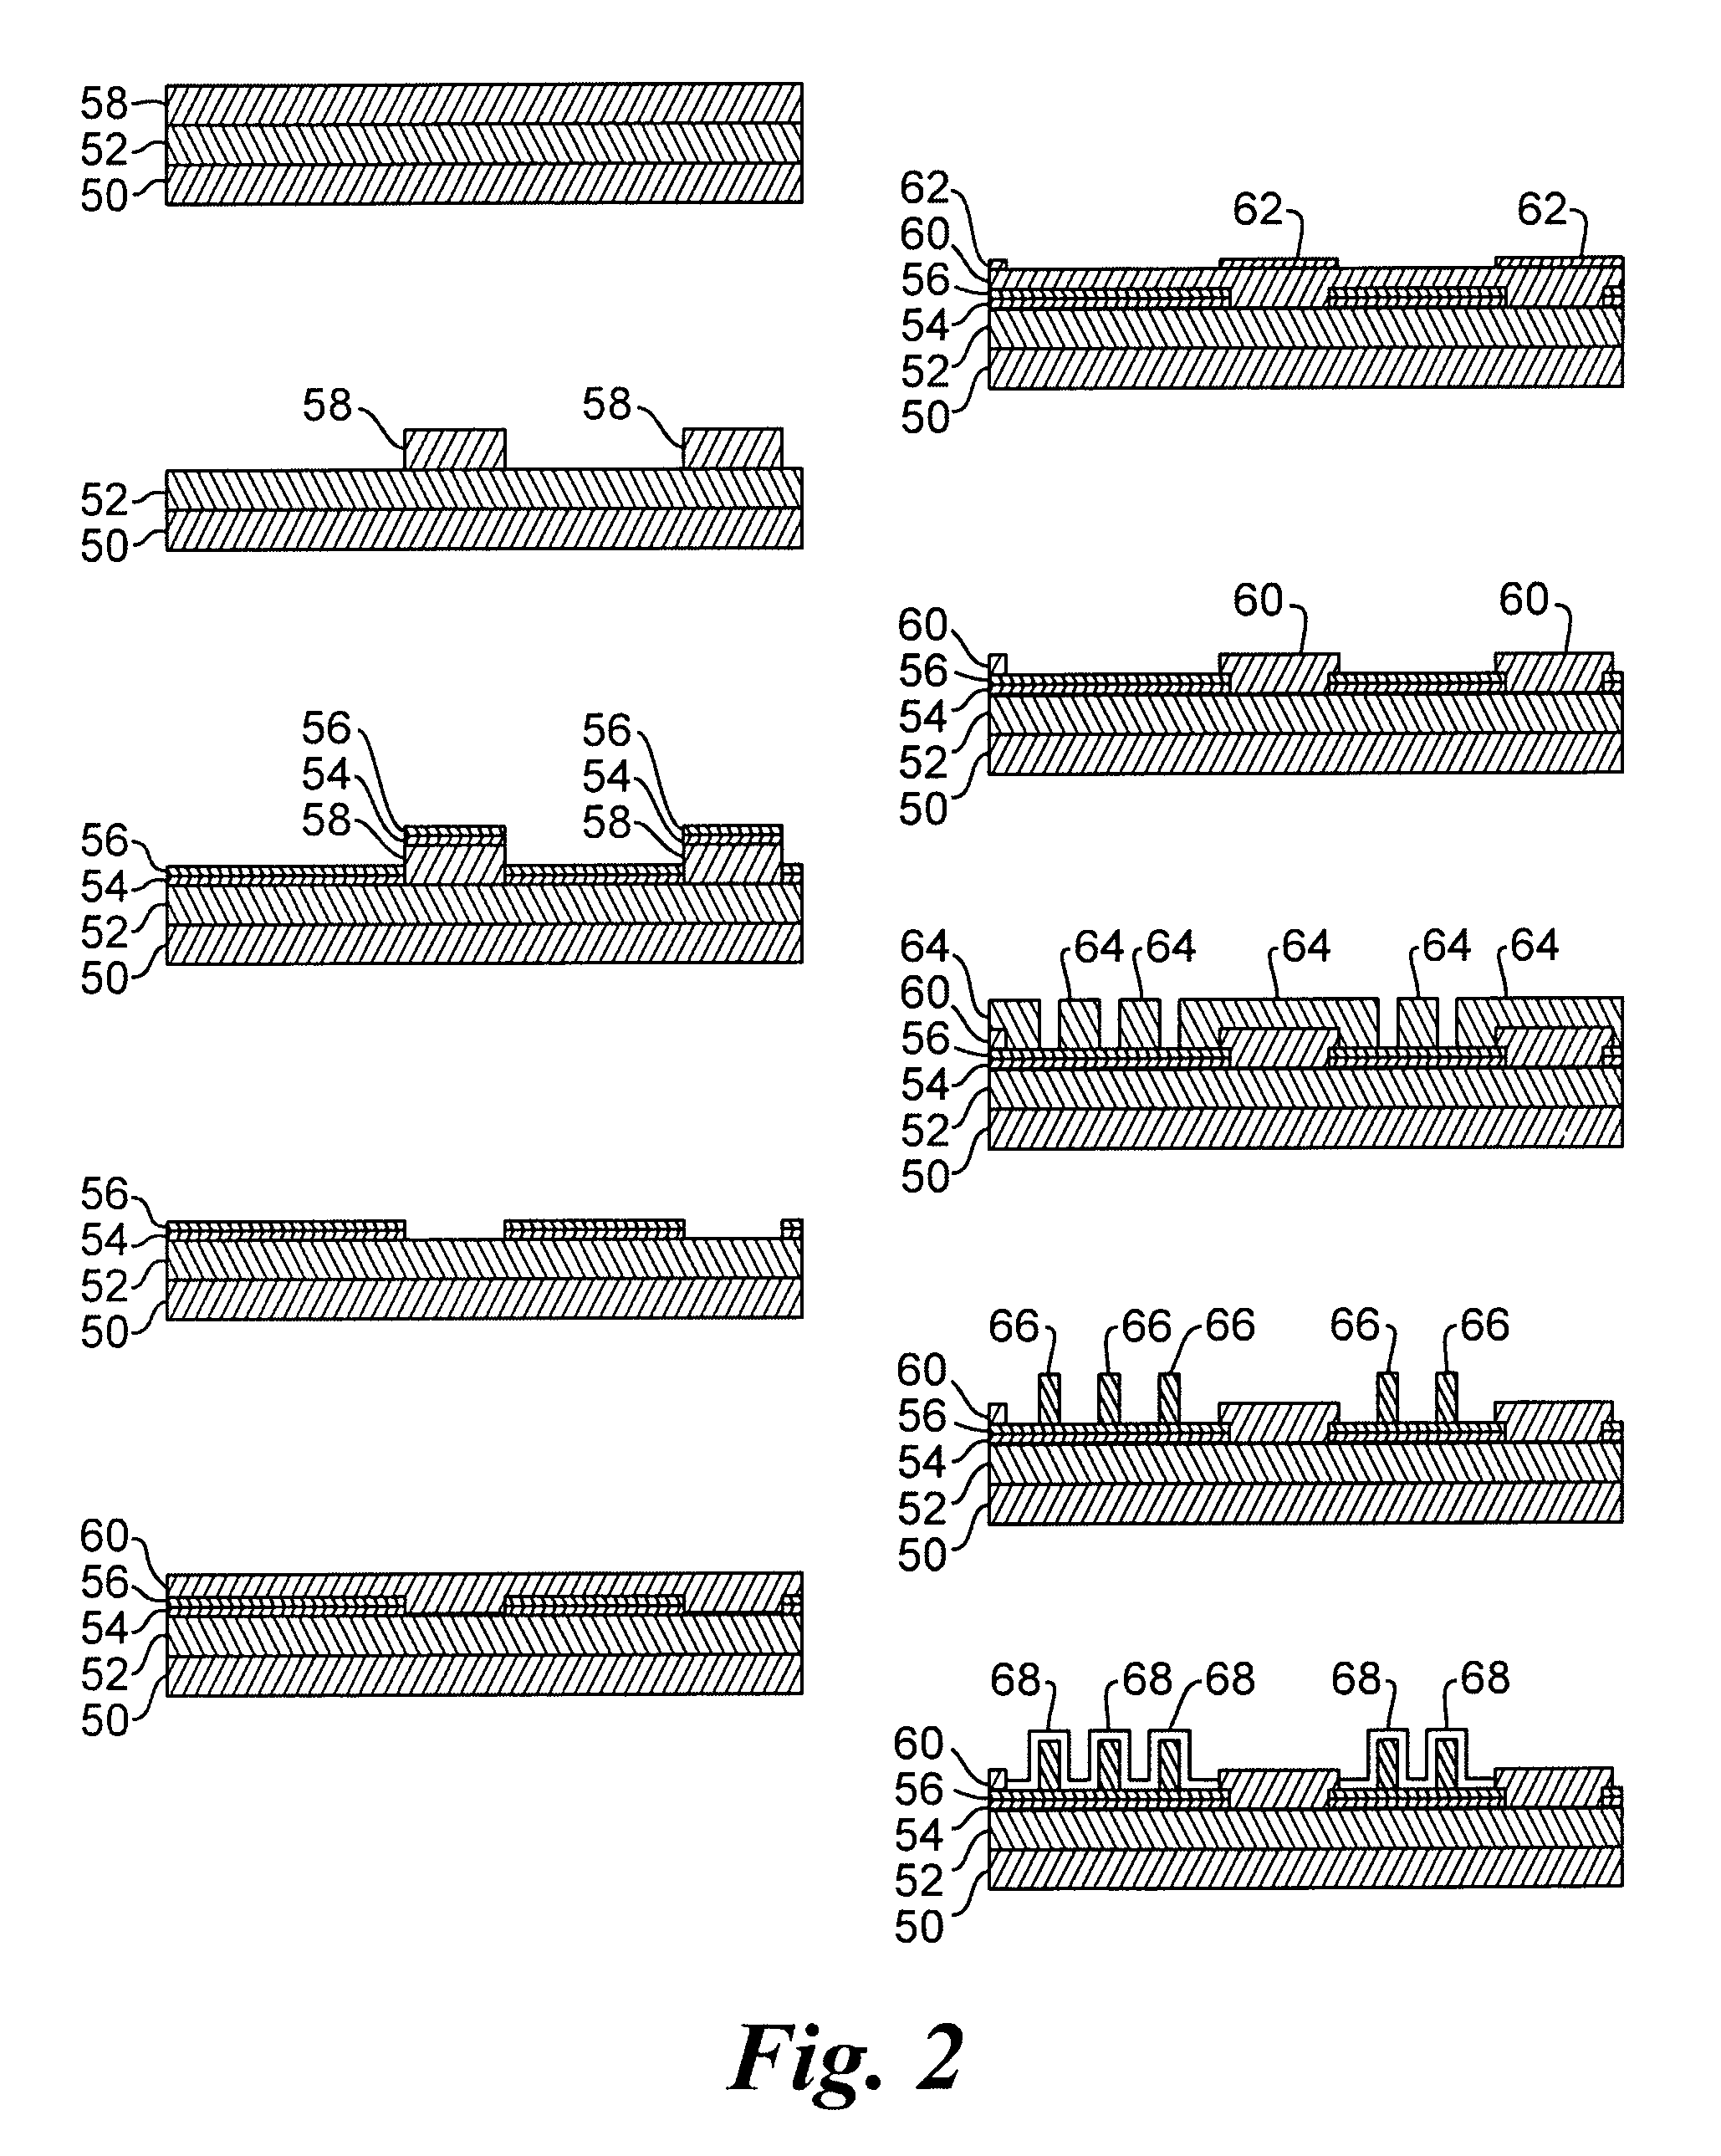 High-density array of micro-machined electrodes for neural stimulation